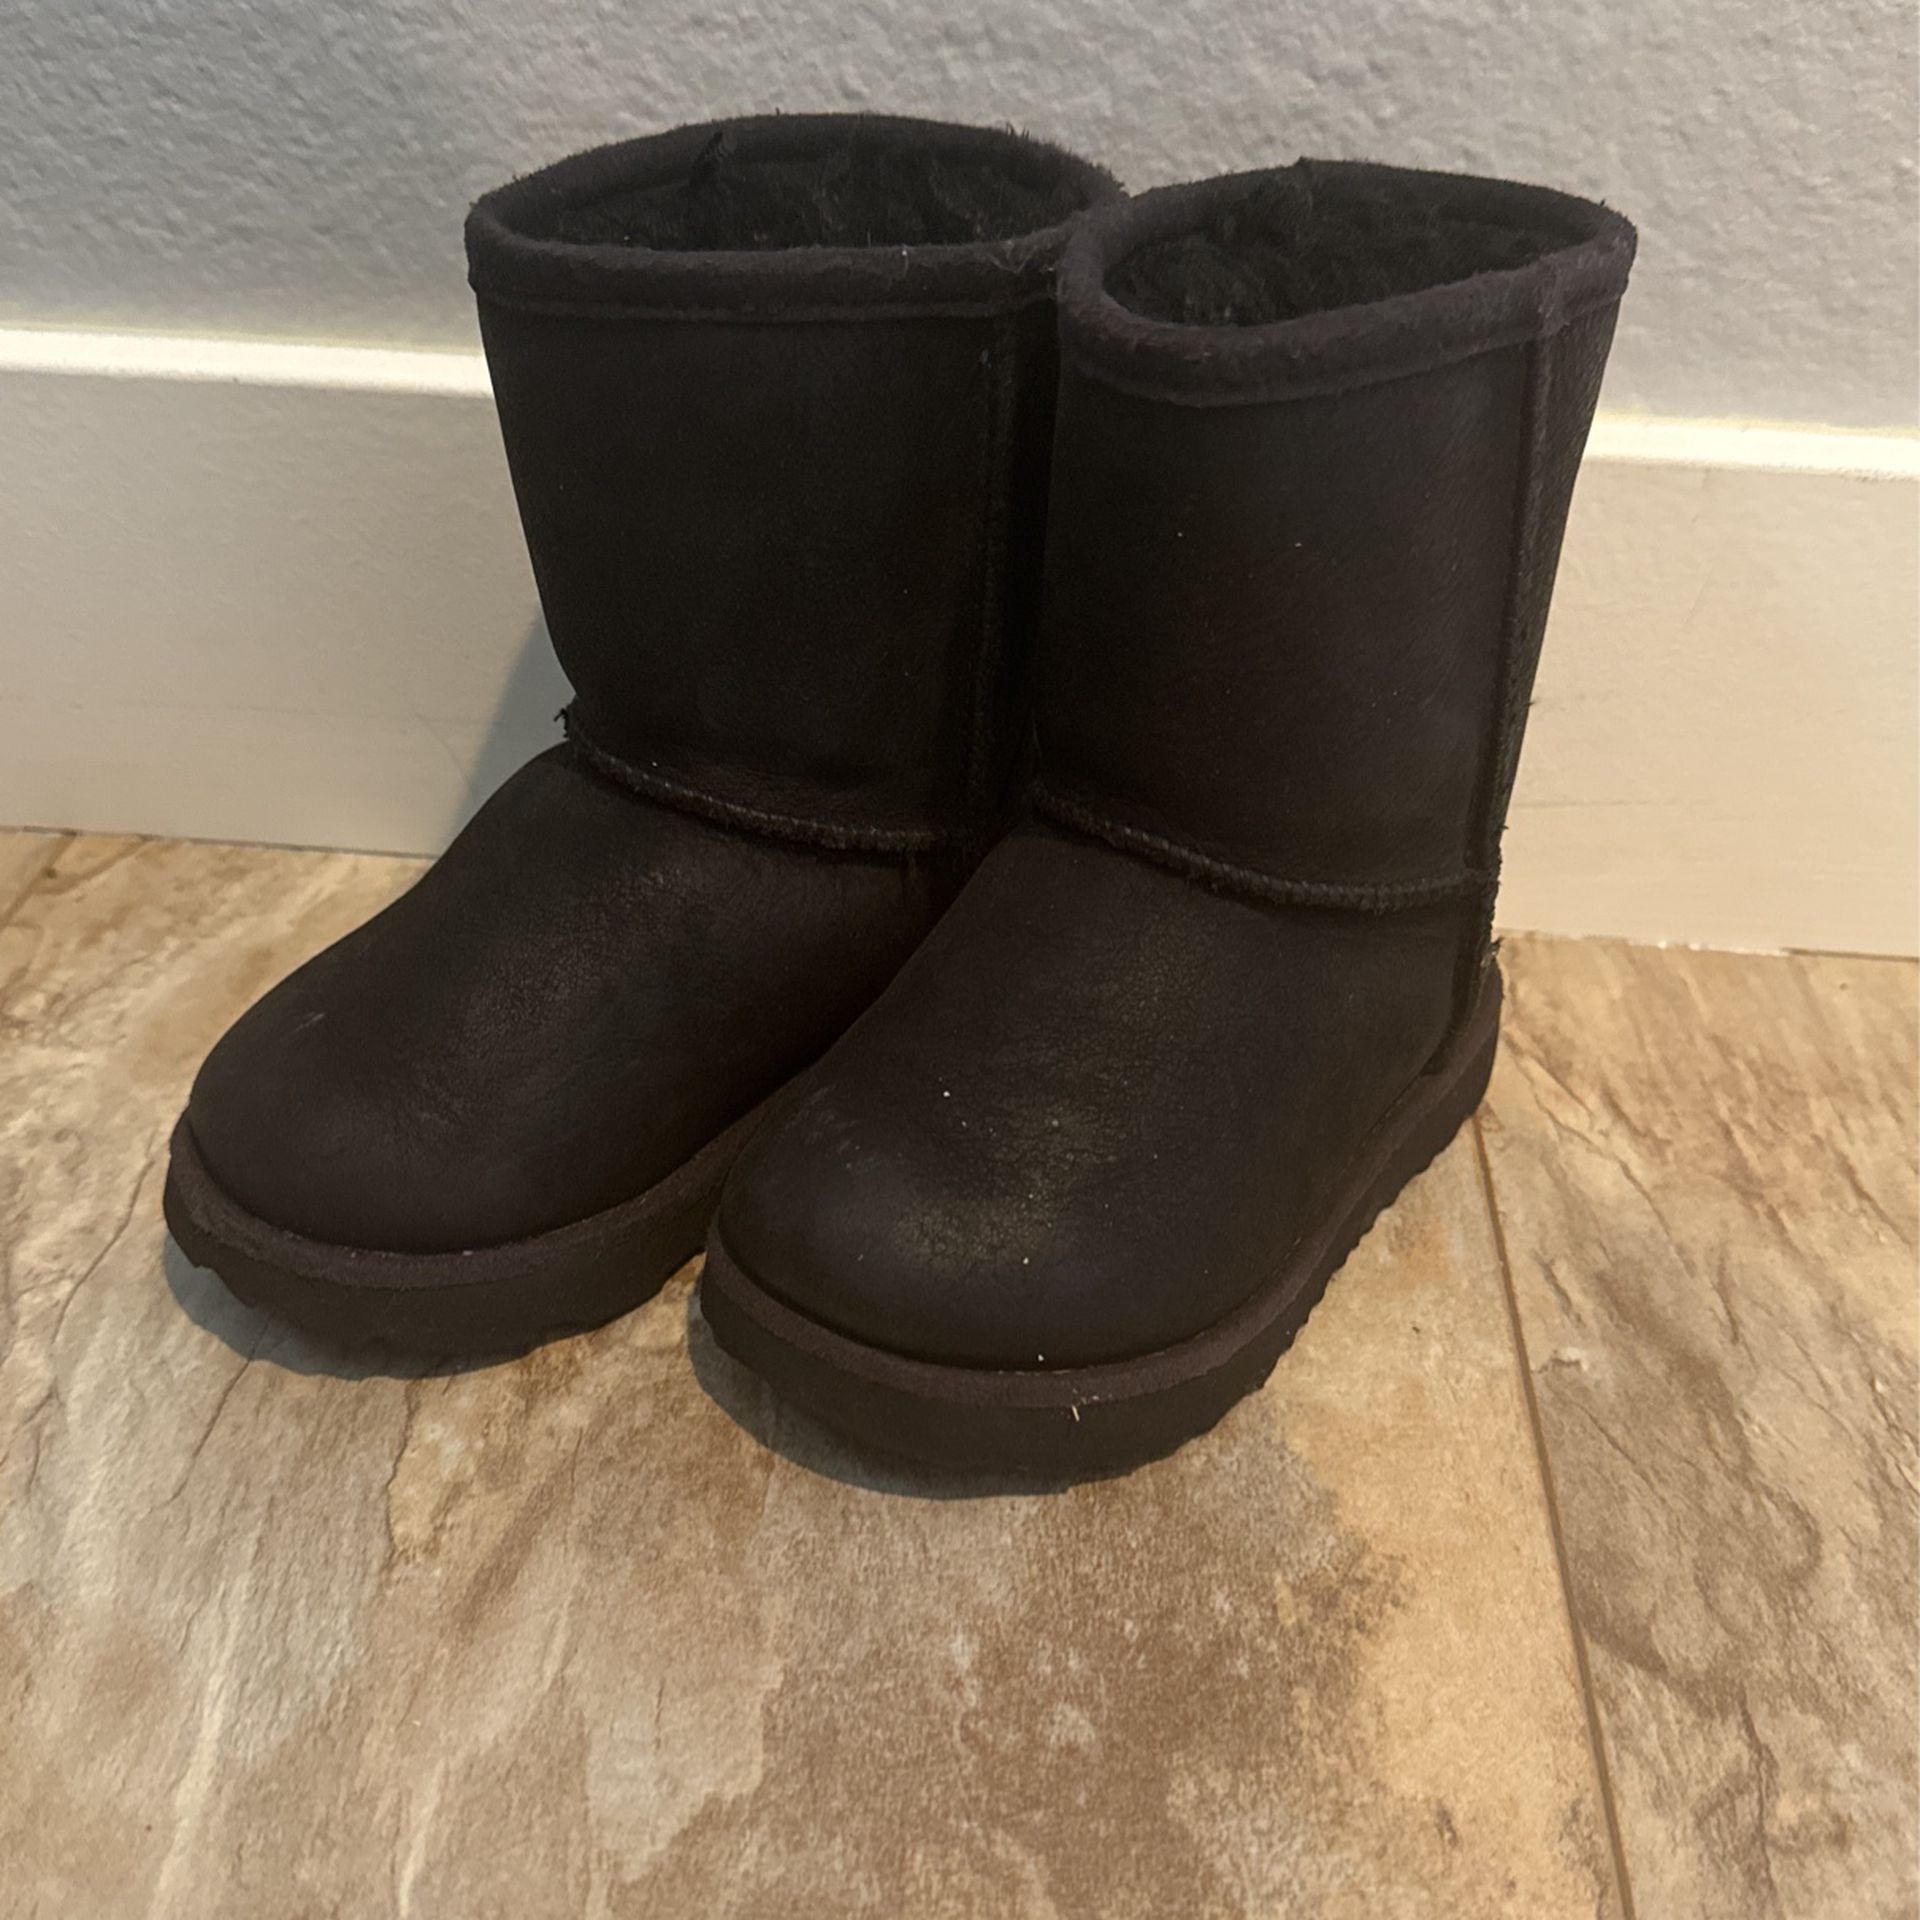 Toddler UGG boots size 7